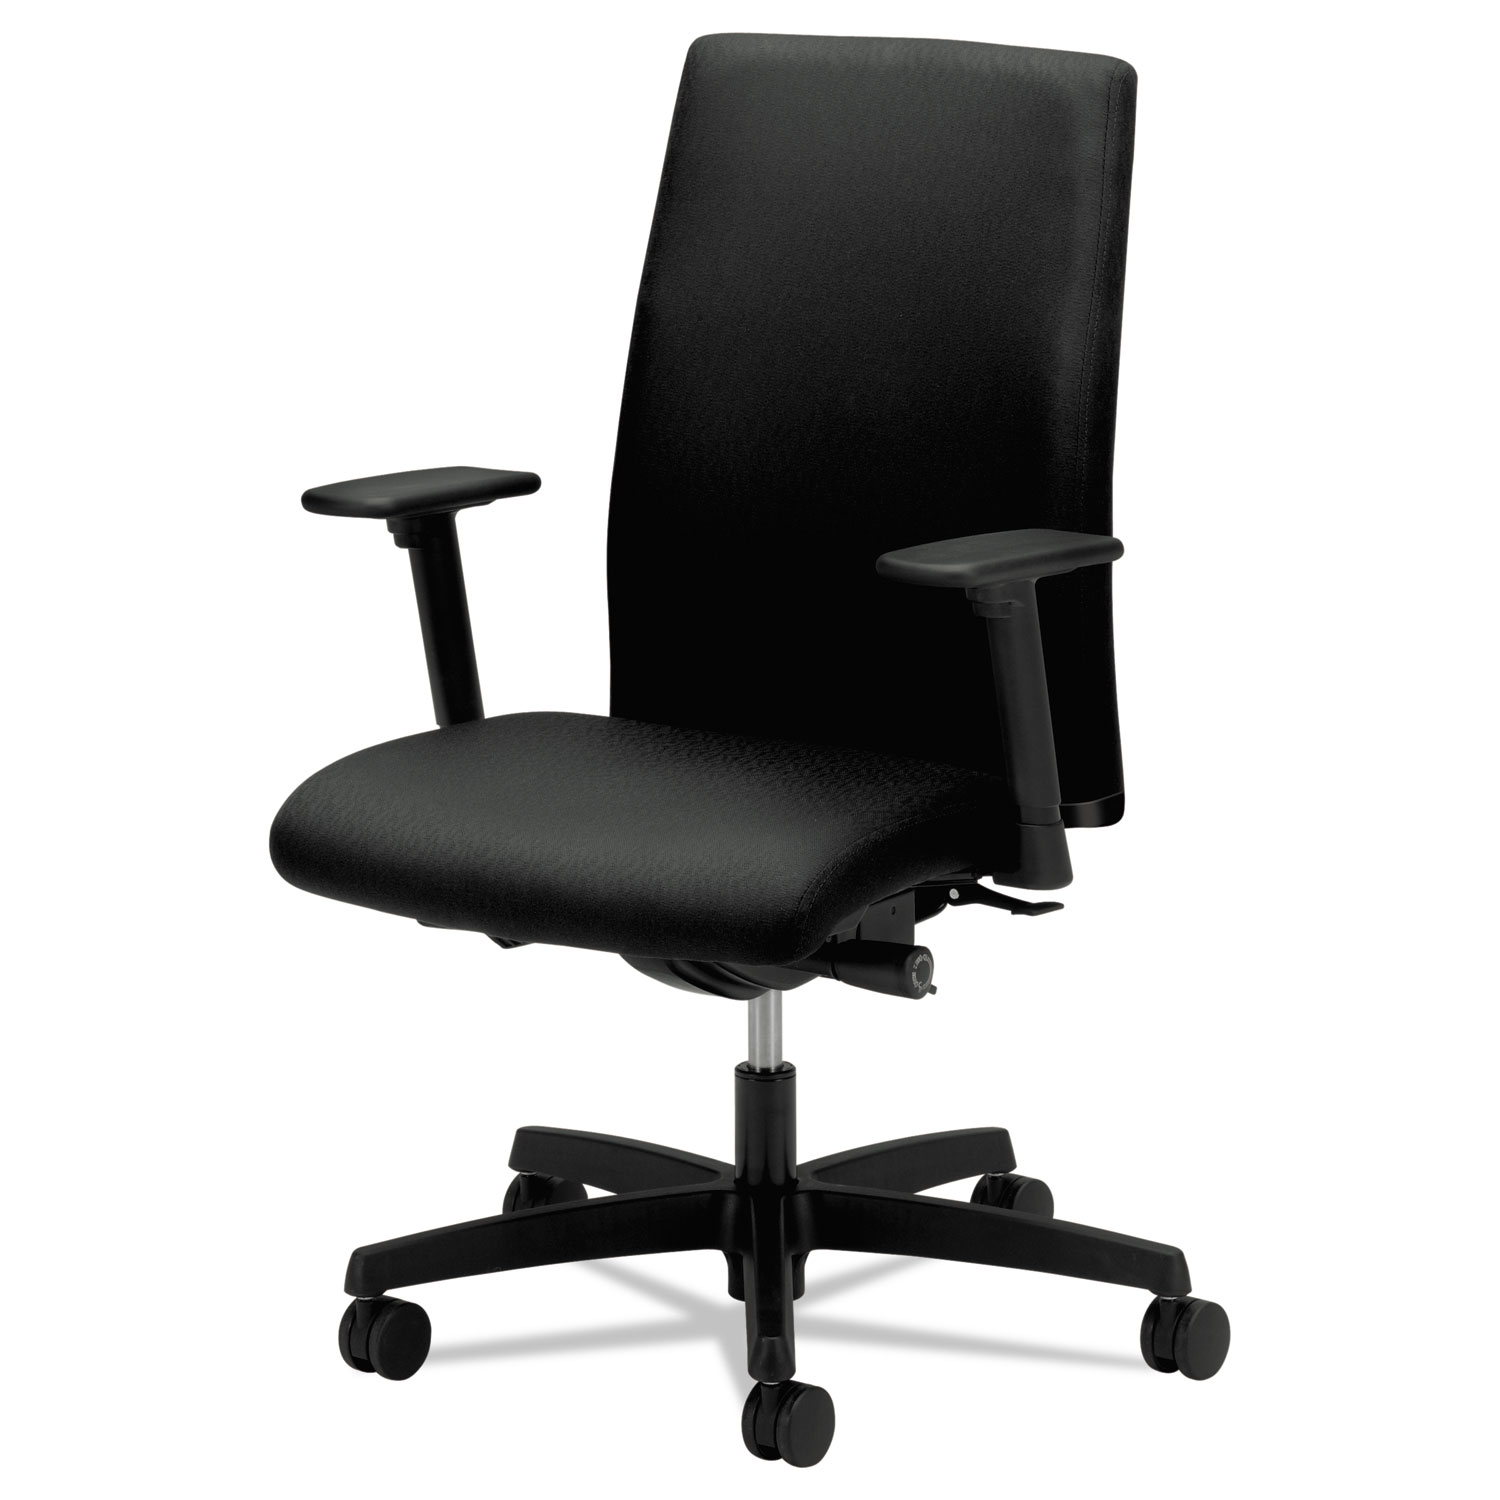 Ignition Series Mid-Back Work Chair, Black Fabric Upholstery